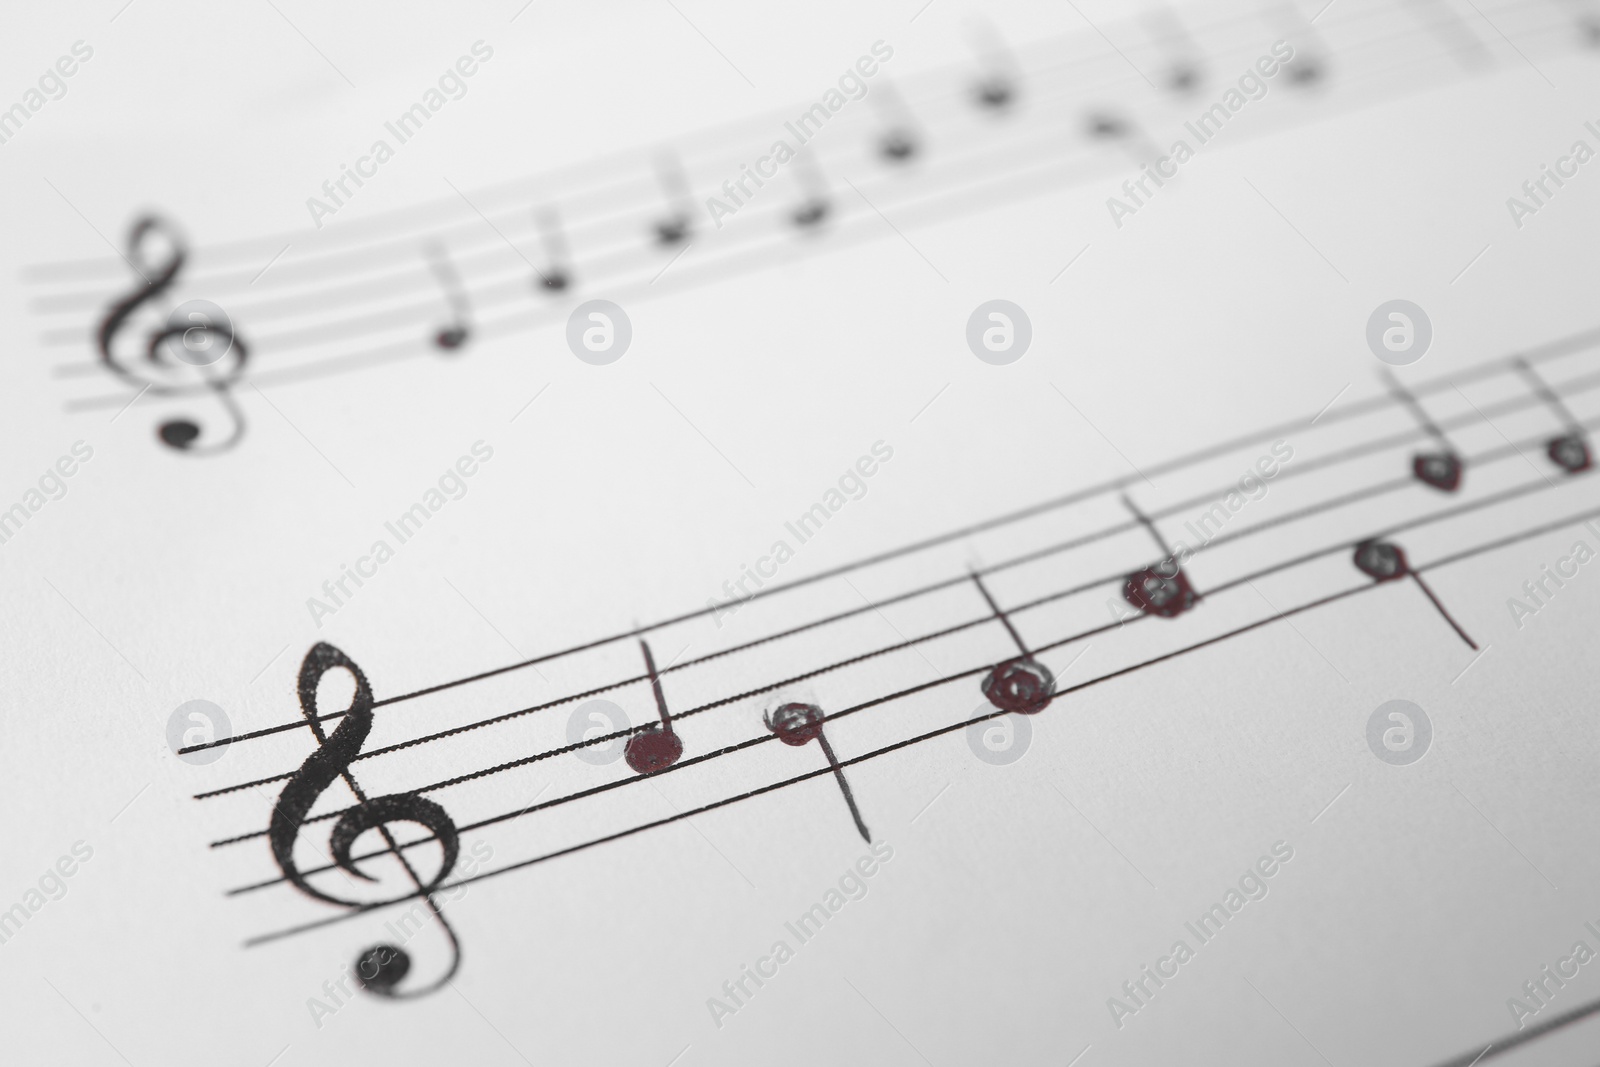 Photo of Sheet of paper with music notes as background, closeup view